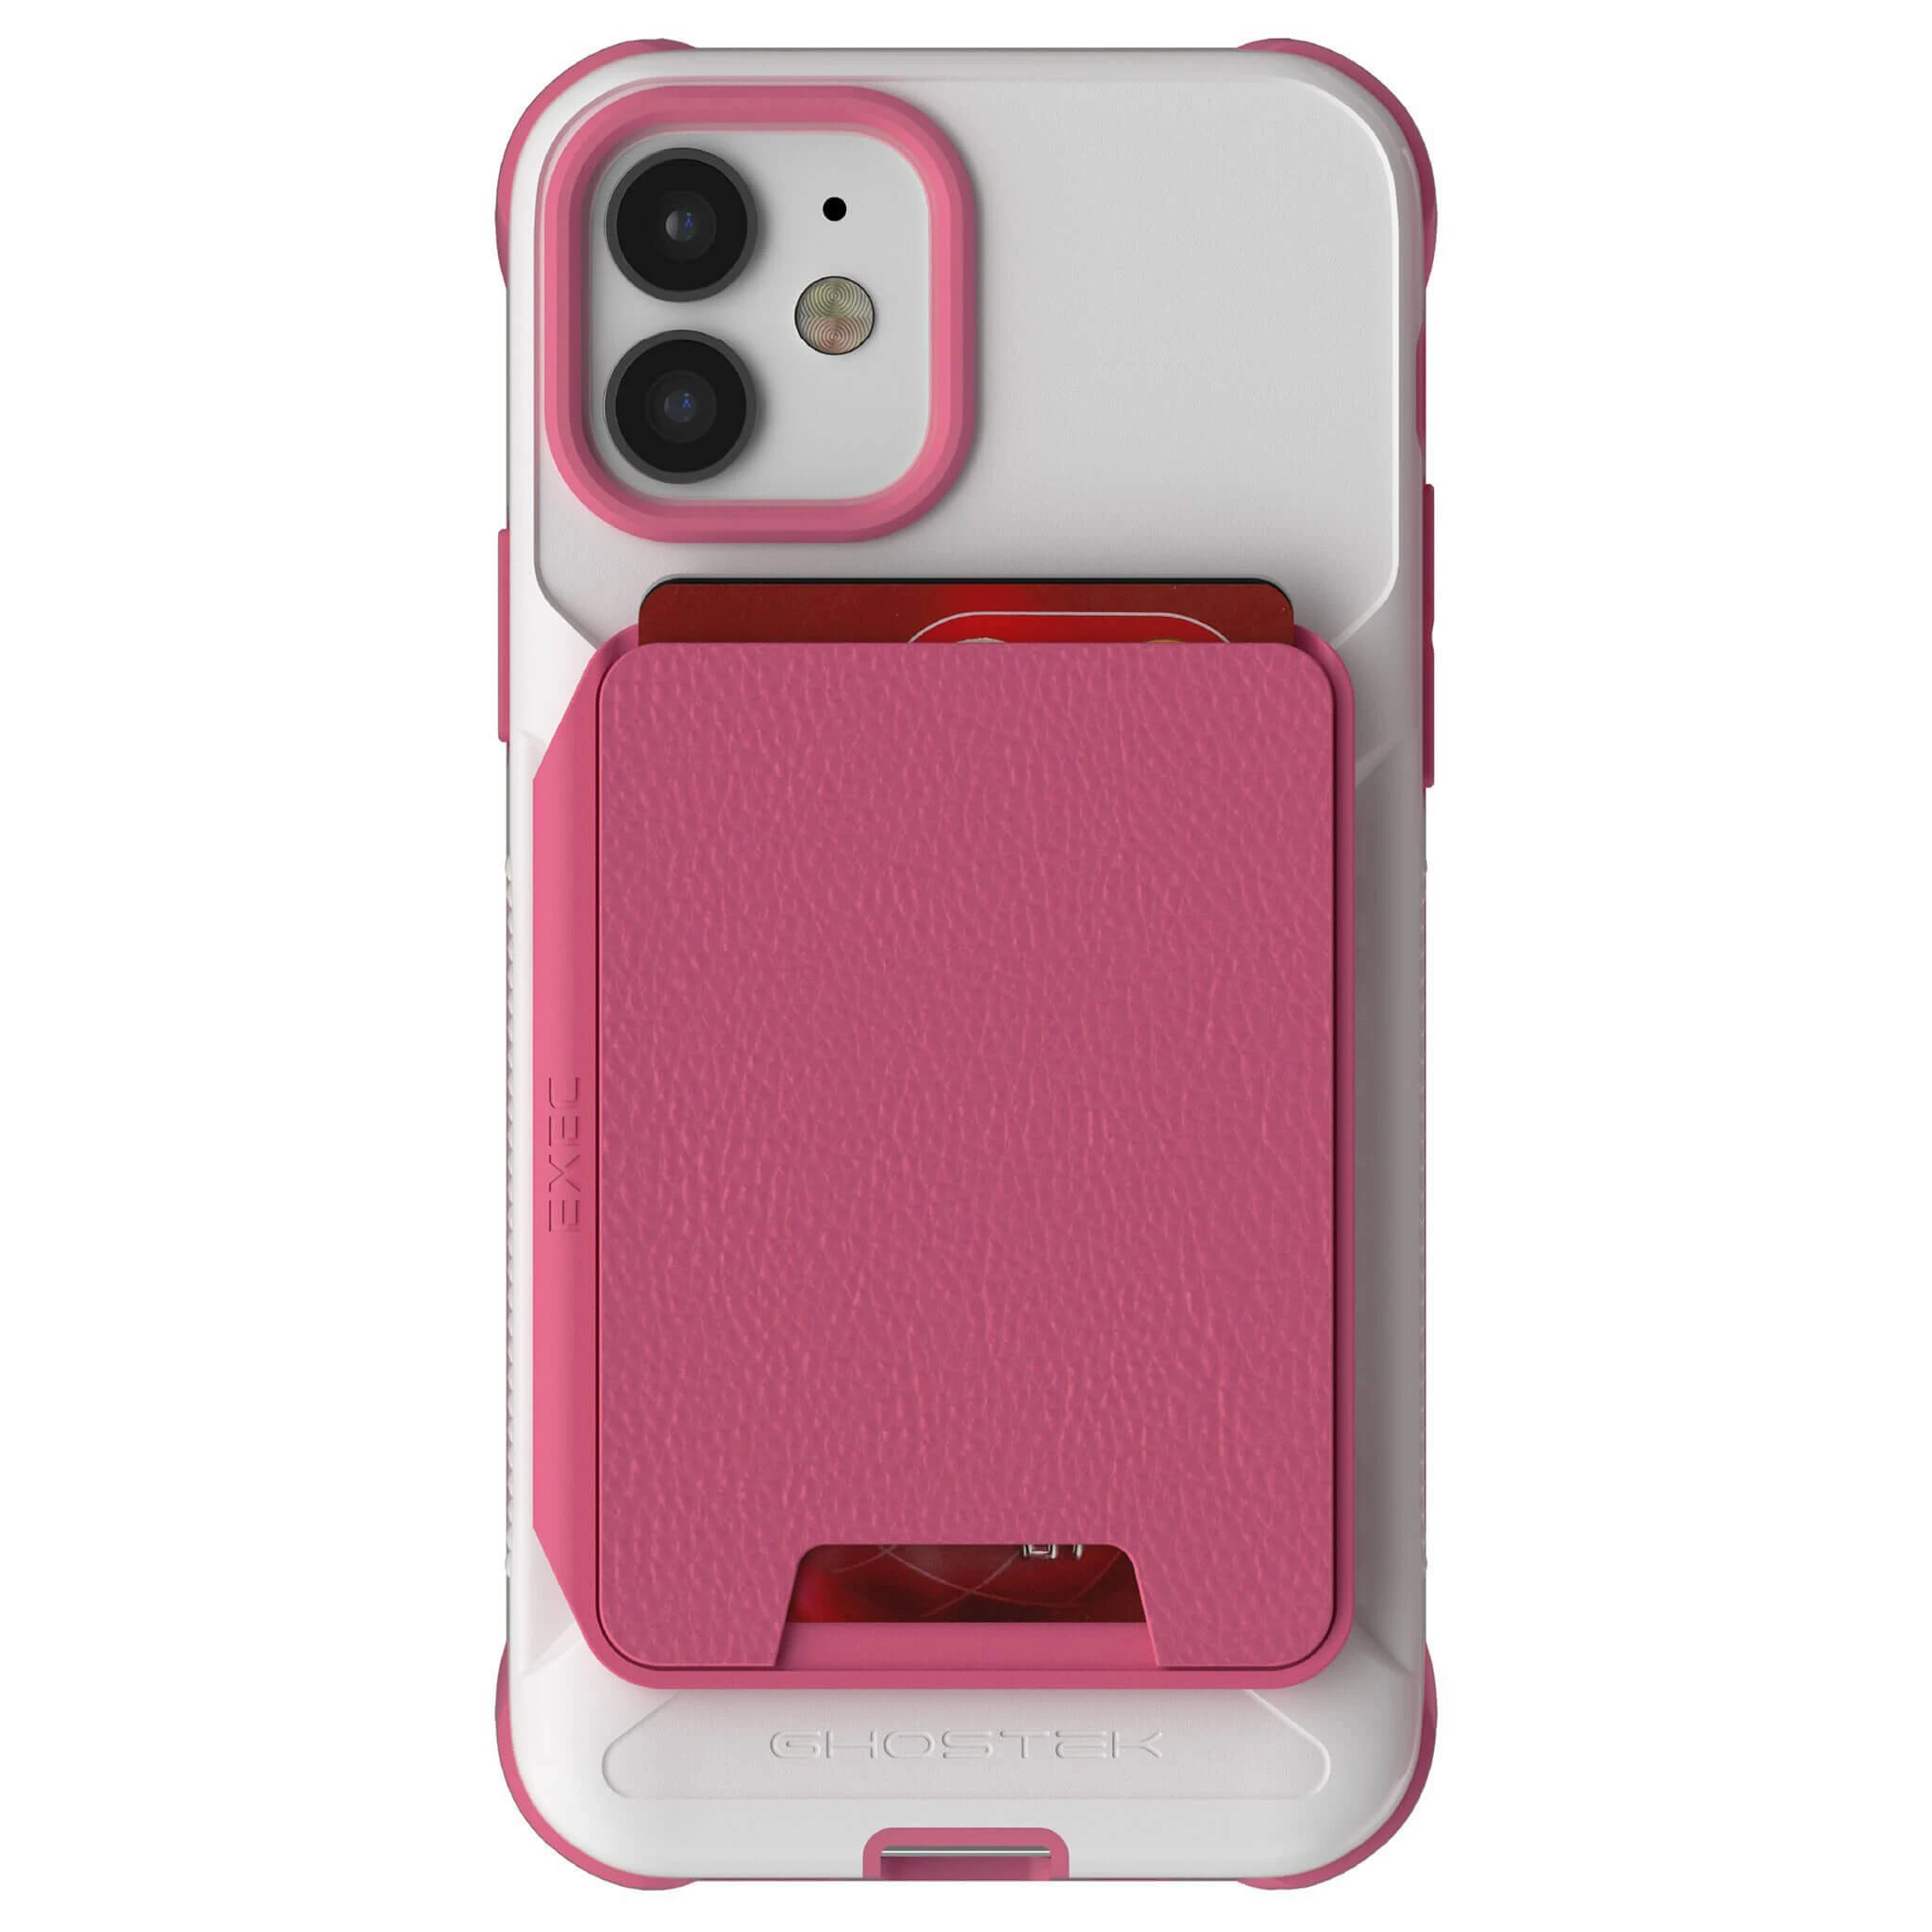 Personalised Red and Pink Phone Case iPhone 14 Case iPhone -  Sweden